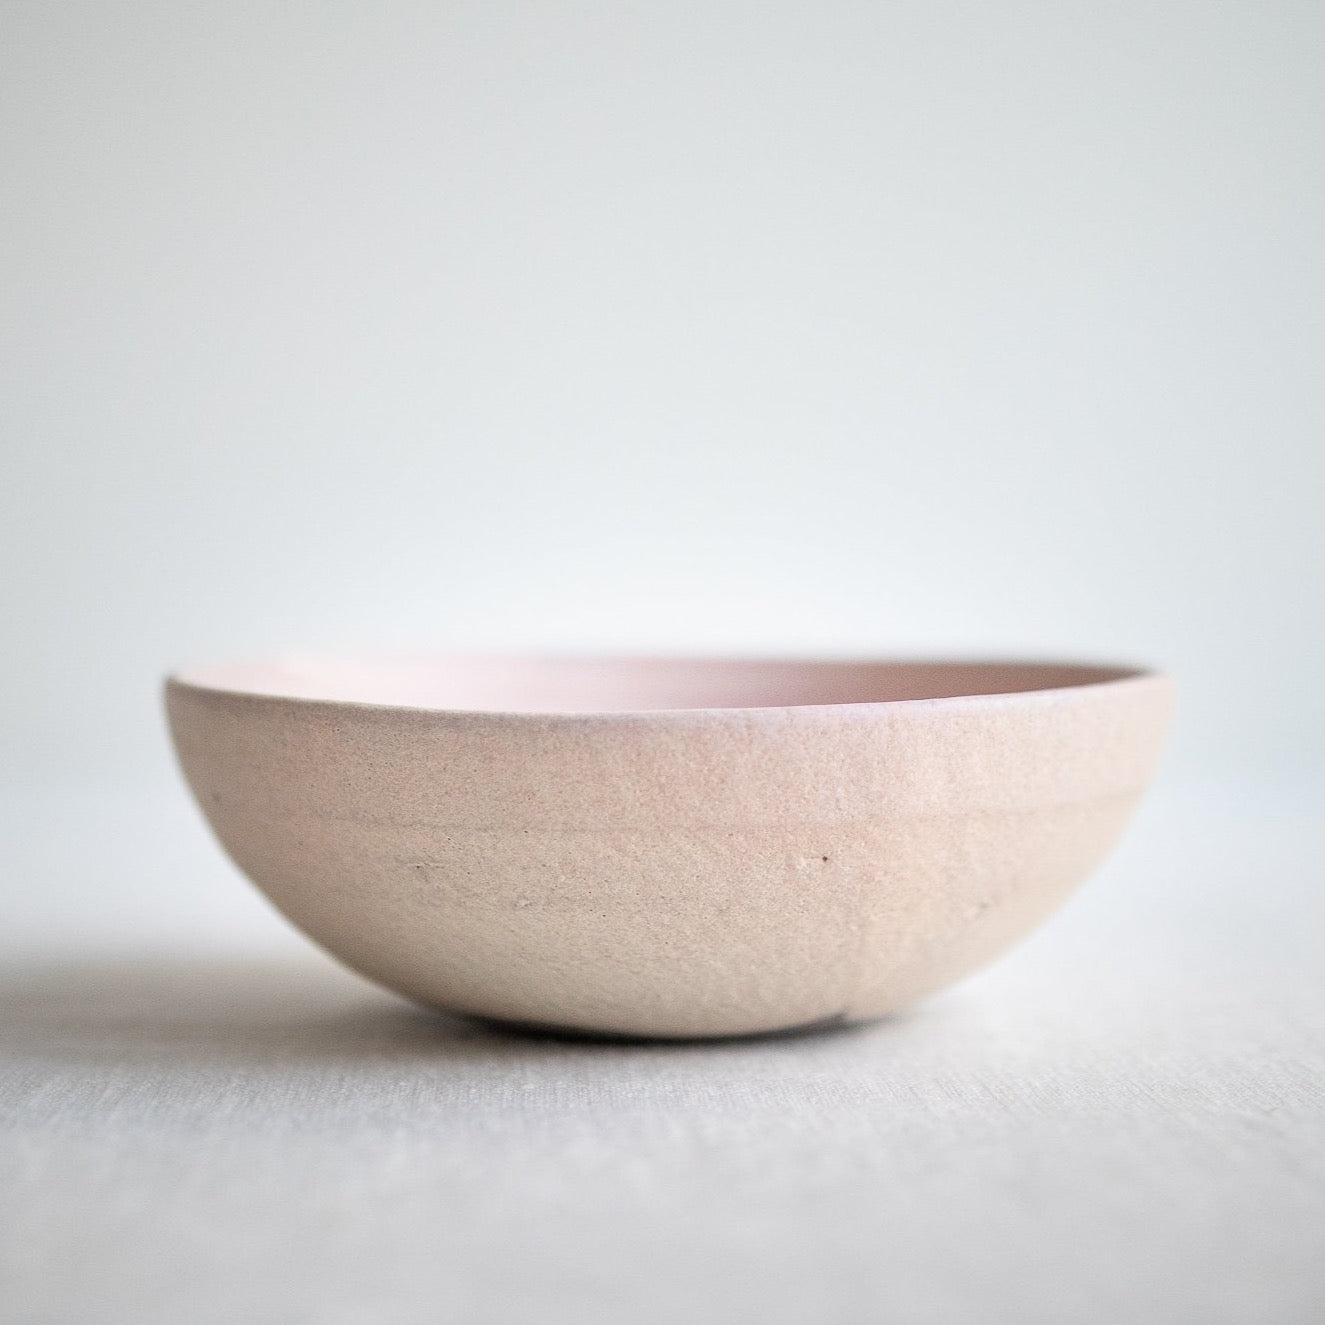 Bowl in pale pink No.2